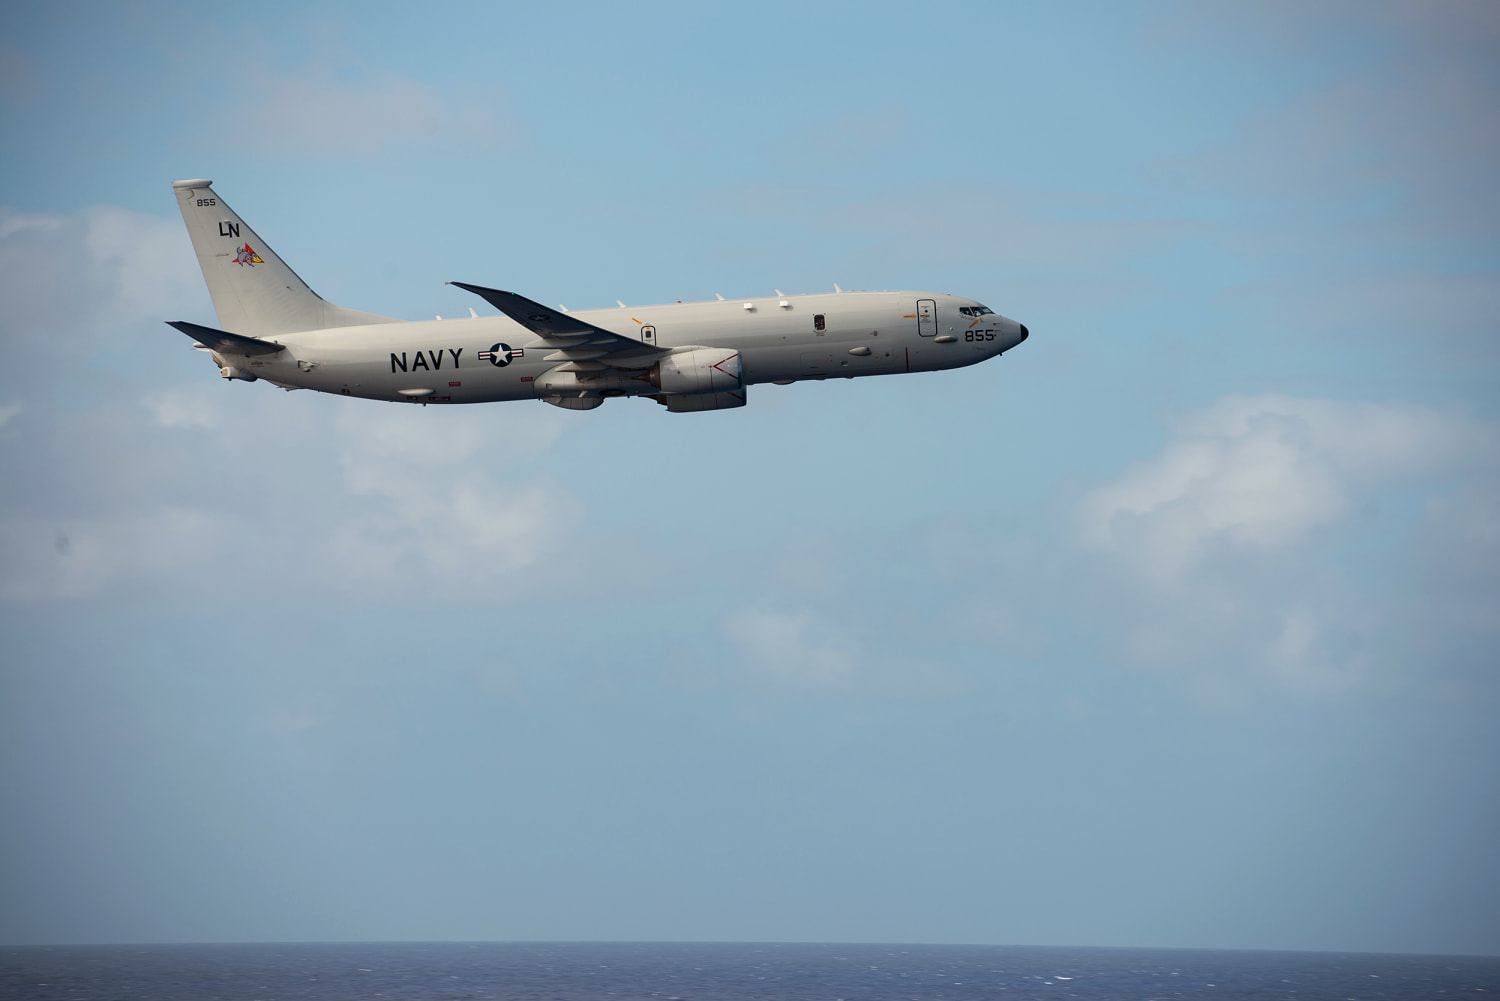 U.S. Navy flies aircraft through the Taiwan Strait a day after U.S.-China defense chiefs hold rare talks